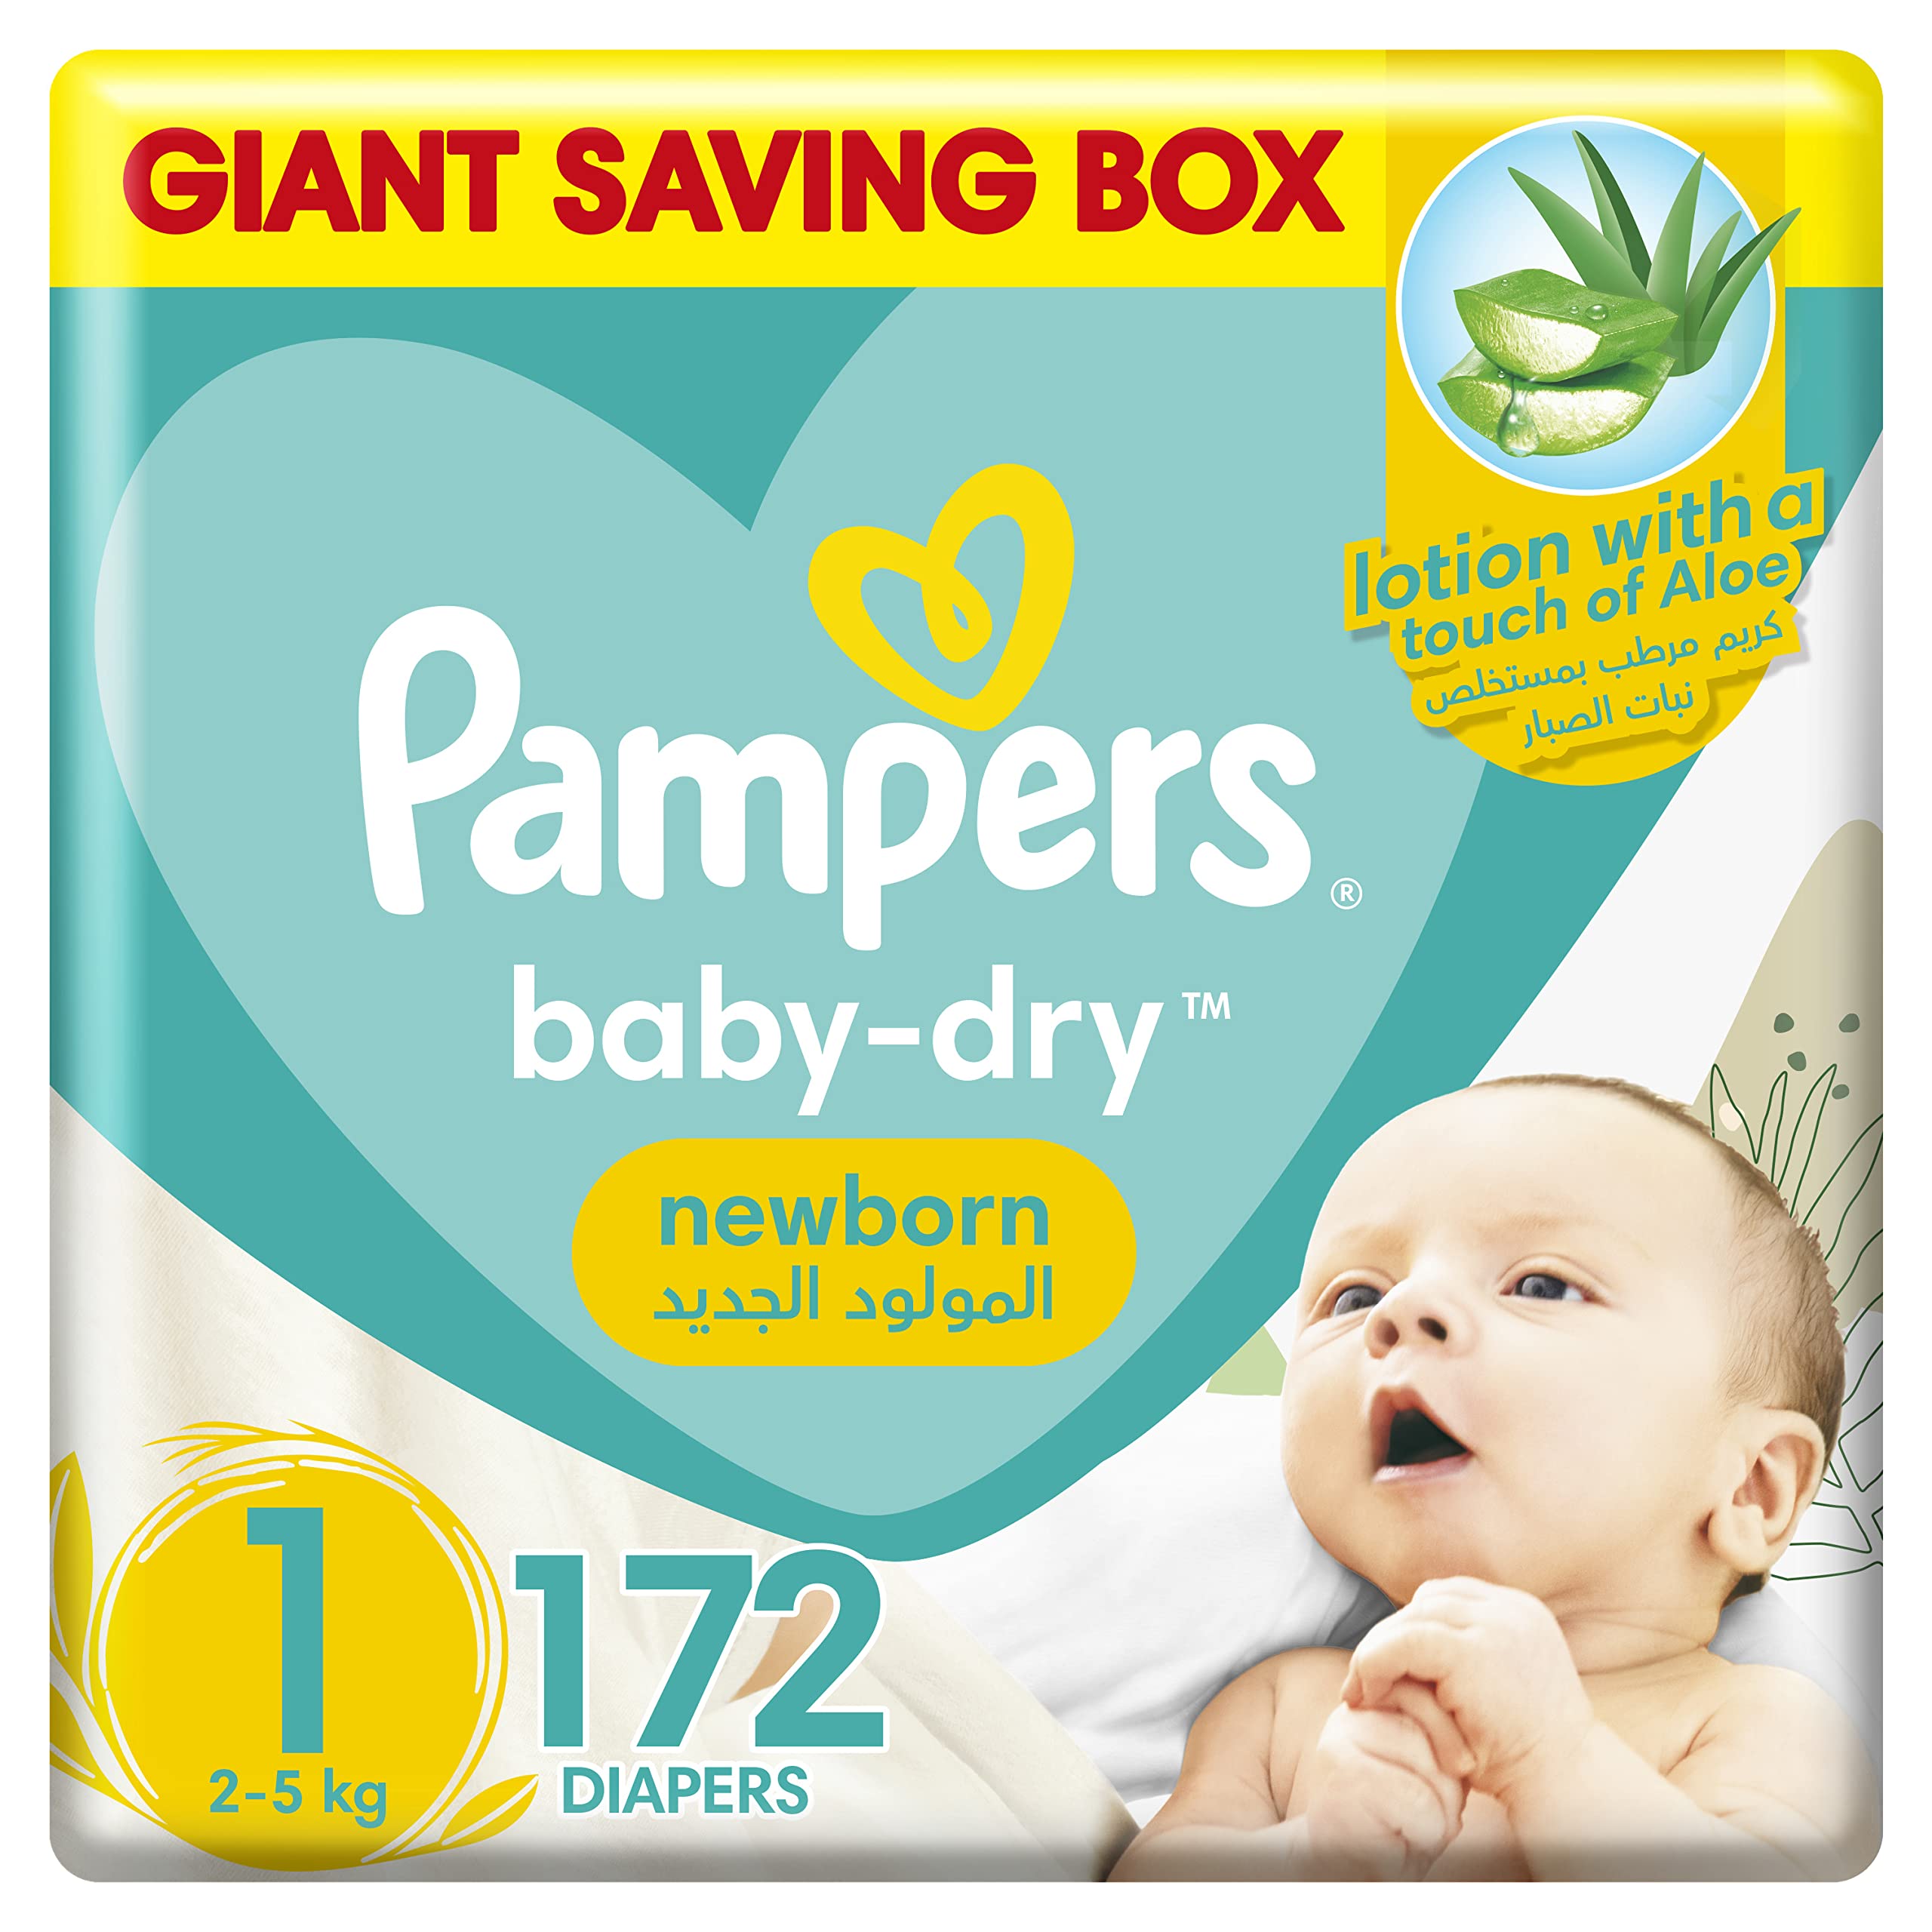 Pampers Baby-Dry Newborn Diapers With Aloe Vera Lotion, Wetness Indicator, And Leakage Protection, Size 1, 2-5 Kg, Jumbo Pack, 172 Diapers